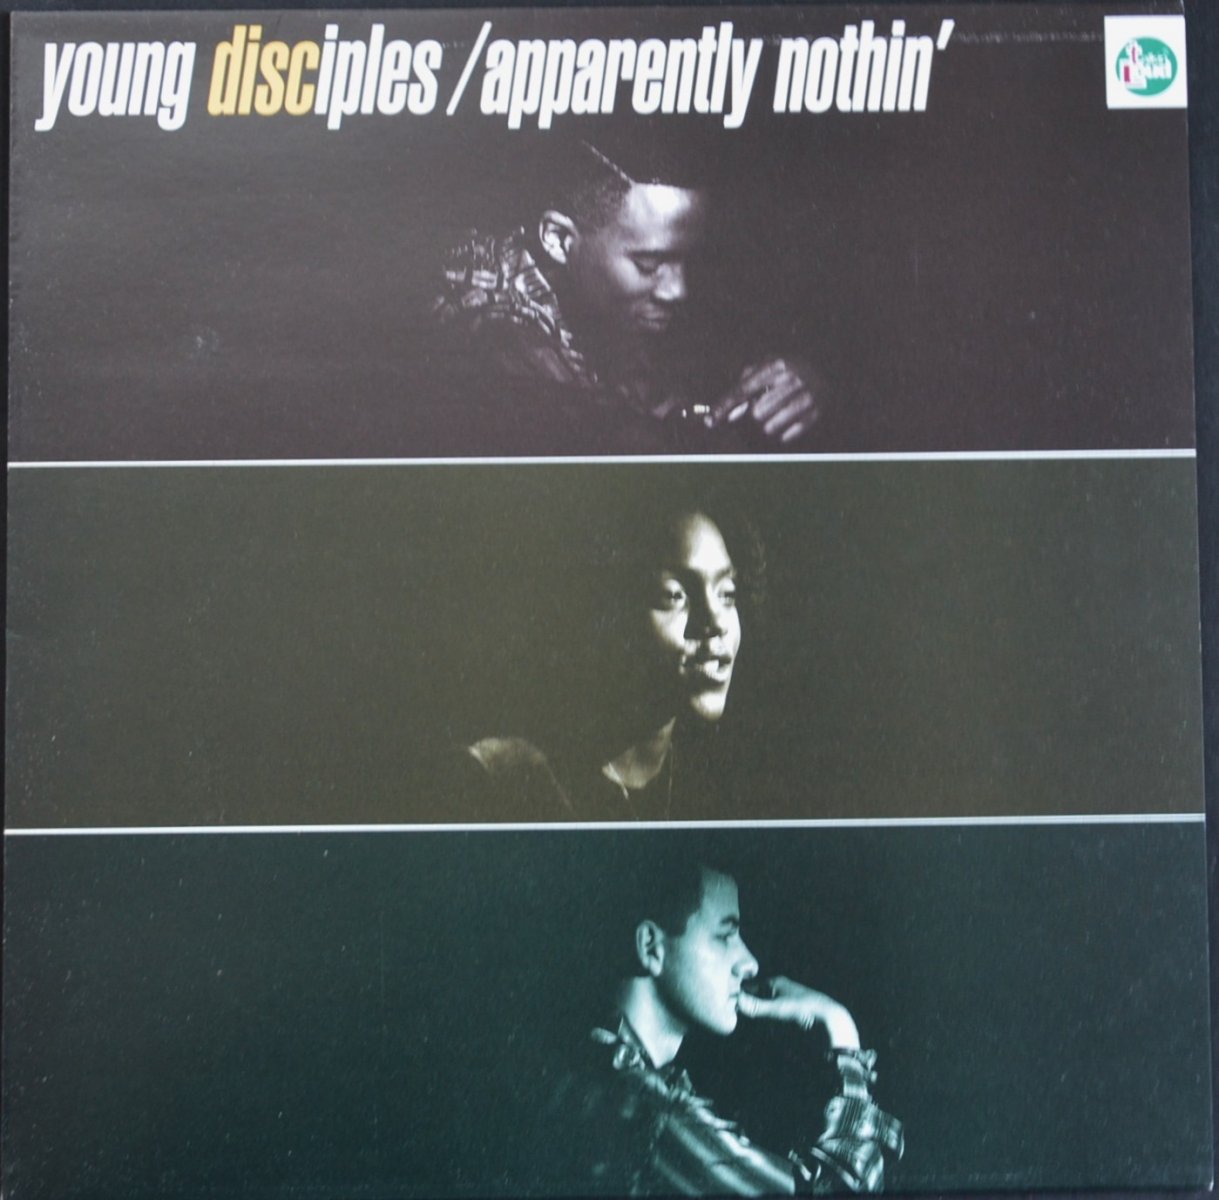 YOUNG DISCIPLES / APPARENTLY NOTHIN' (12